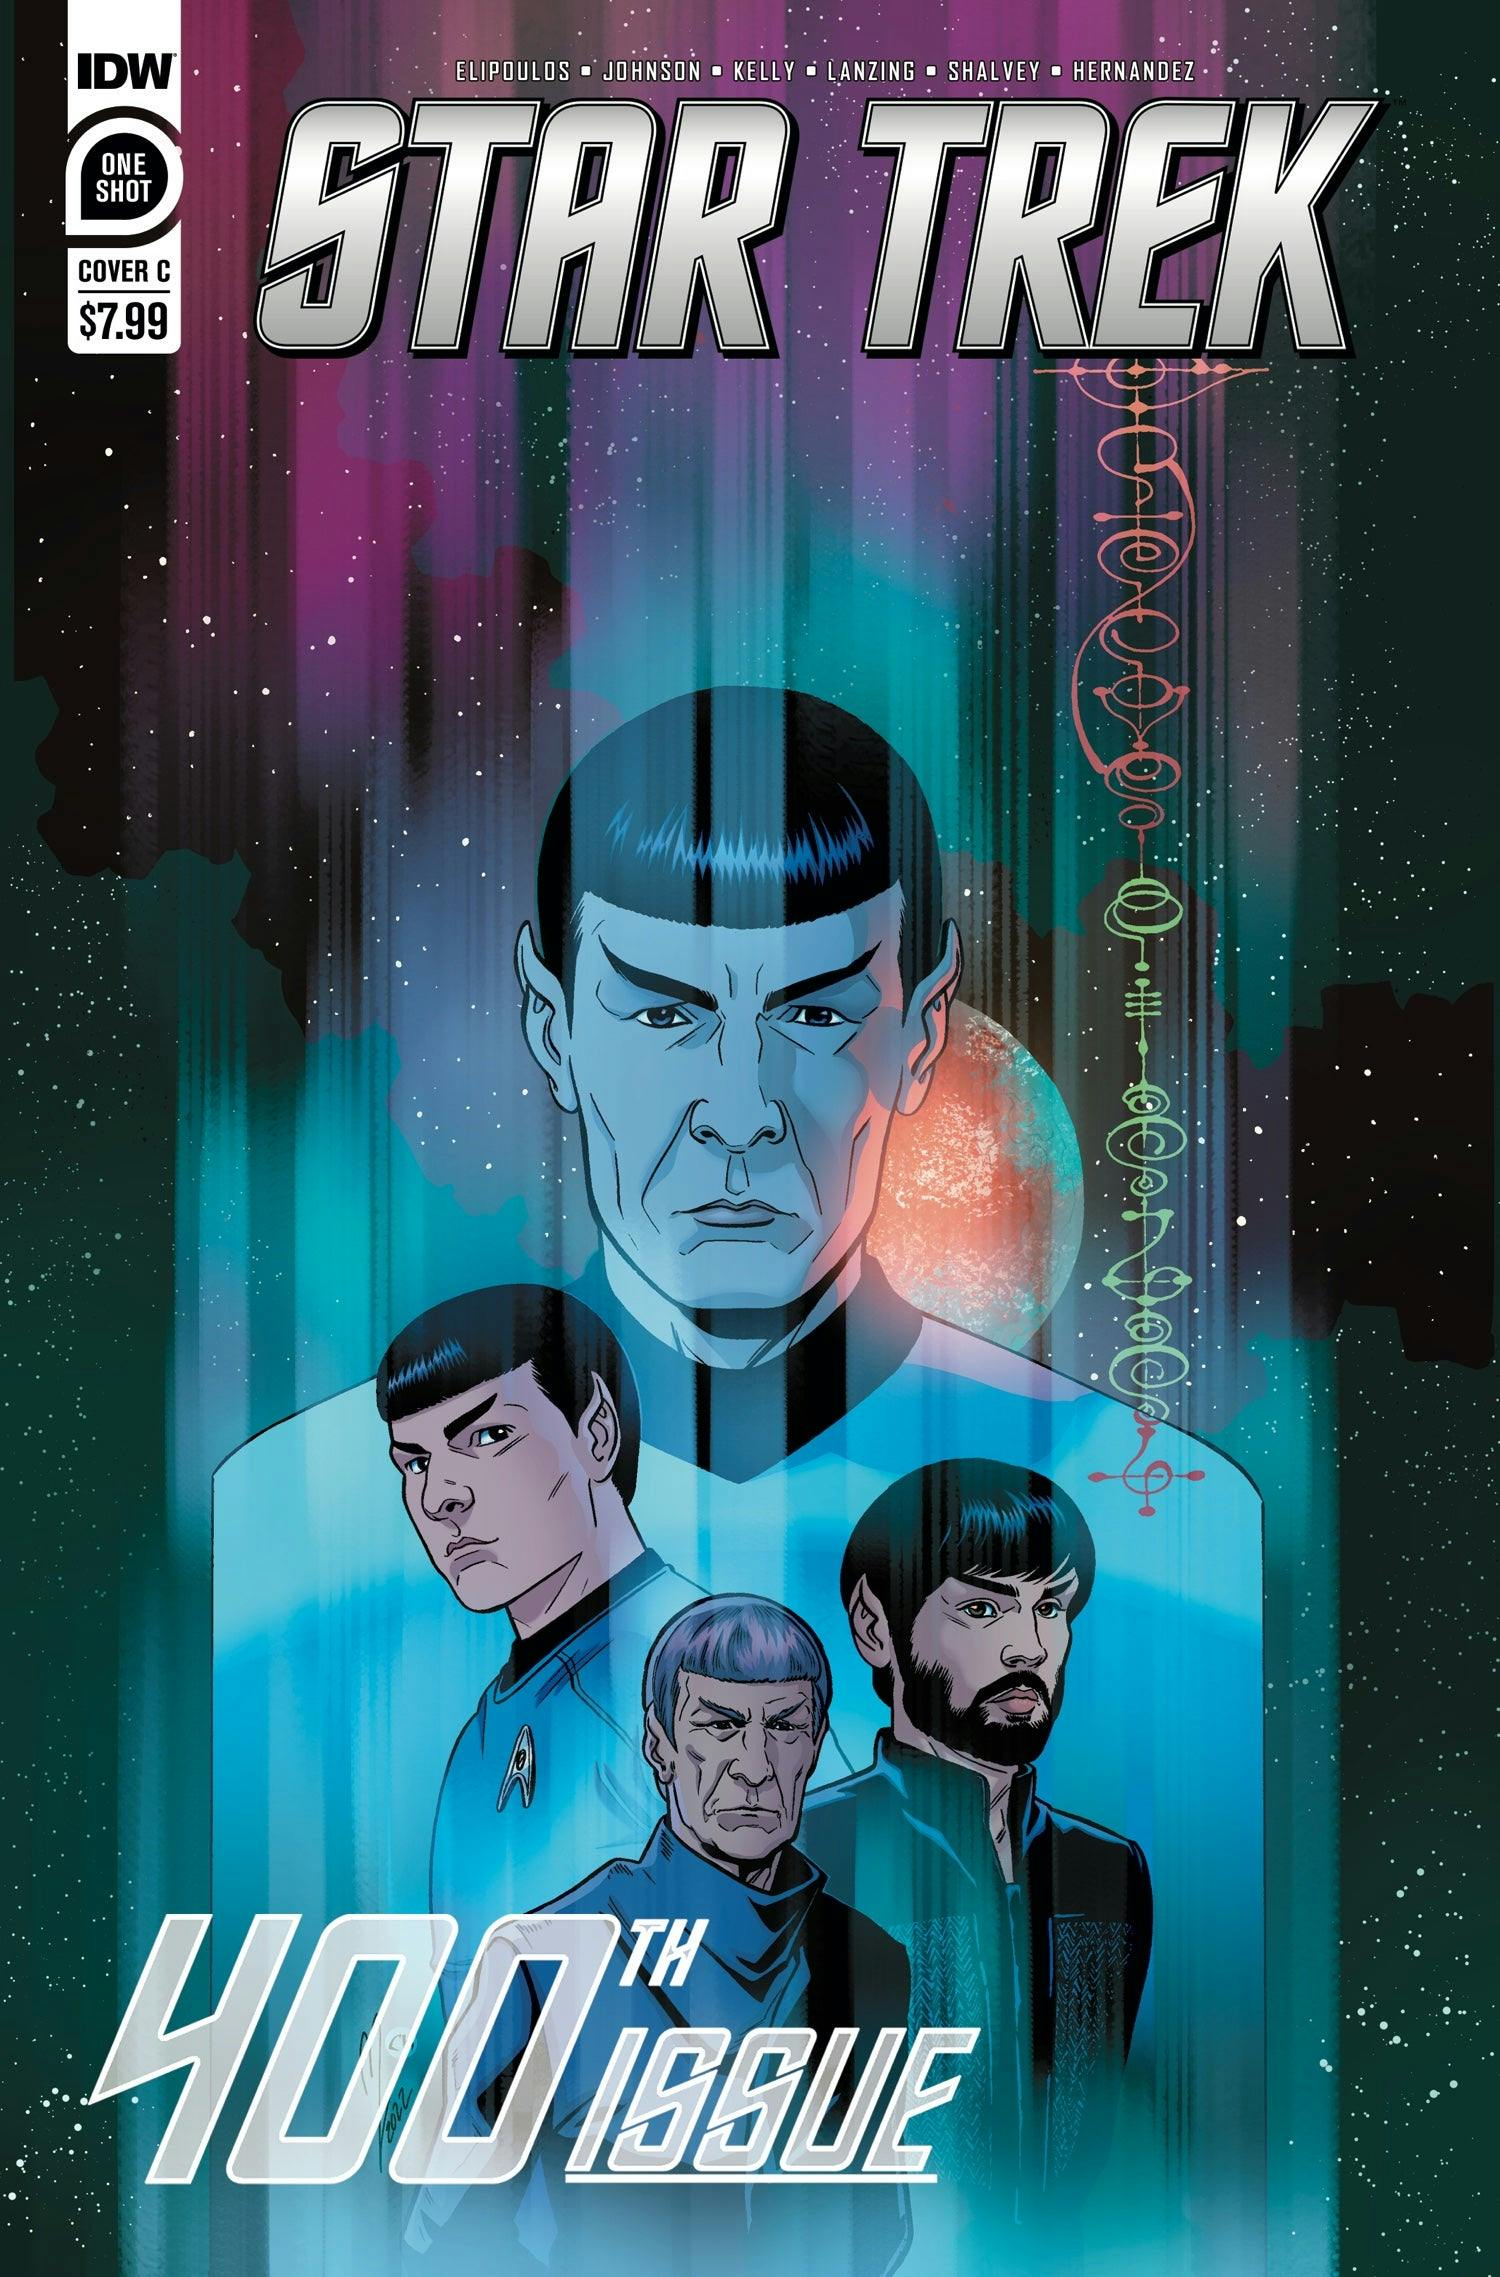 Star Trek #400 C cover, featuring images of Spock from across the franchise.